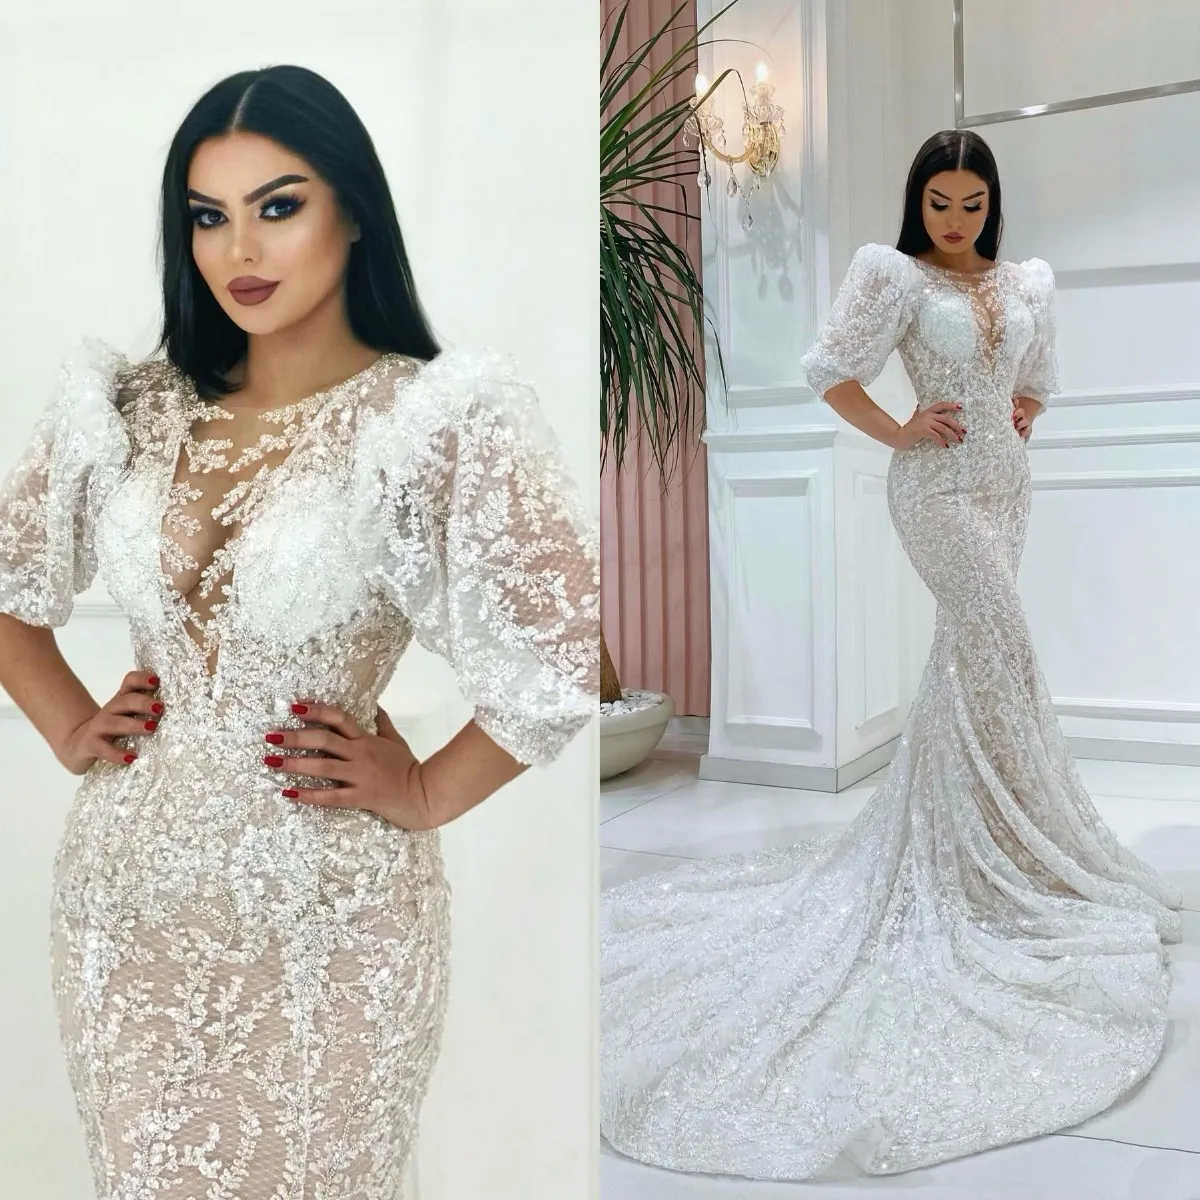 

Sheer V Neck Mermaid Wedding Dresses Floor Length Bridal Gowns Puff Half Sleeve Lace Applique Second Reception Gowns